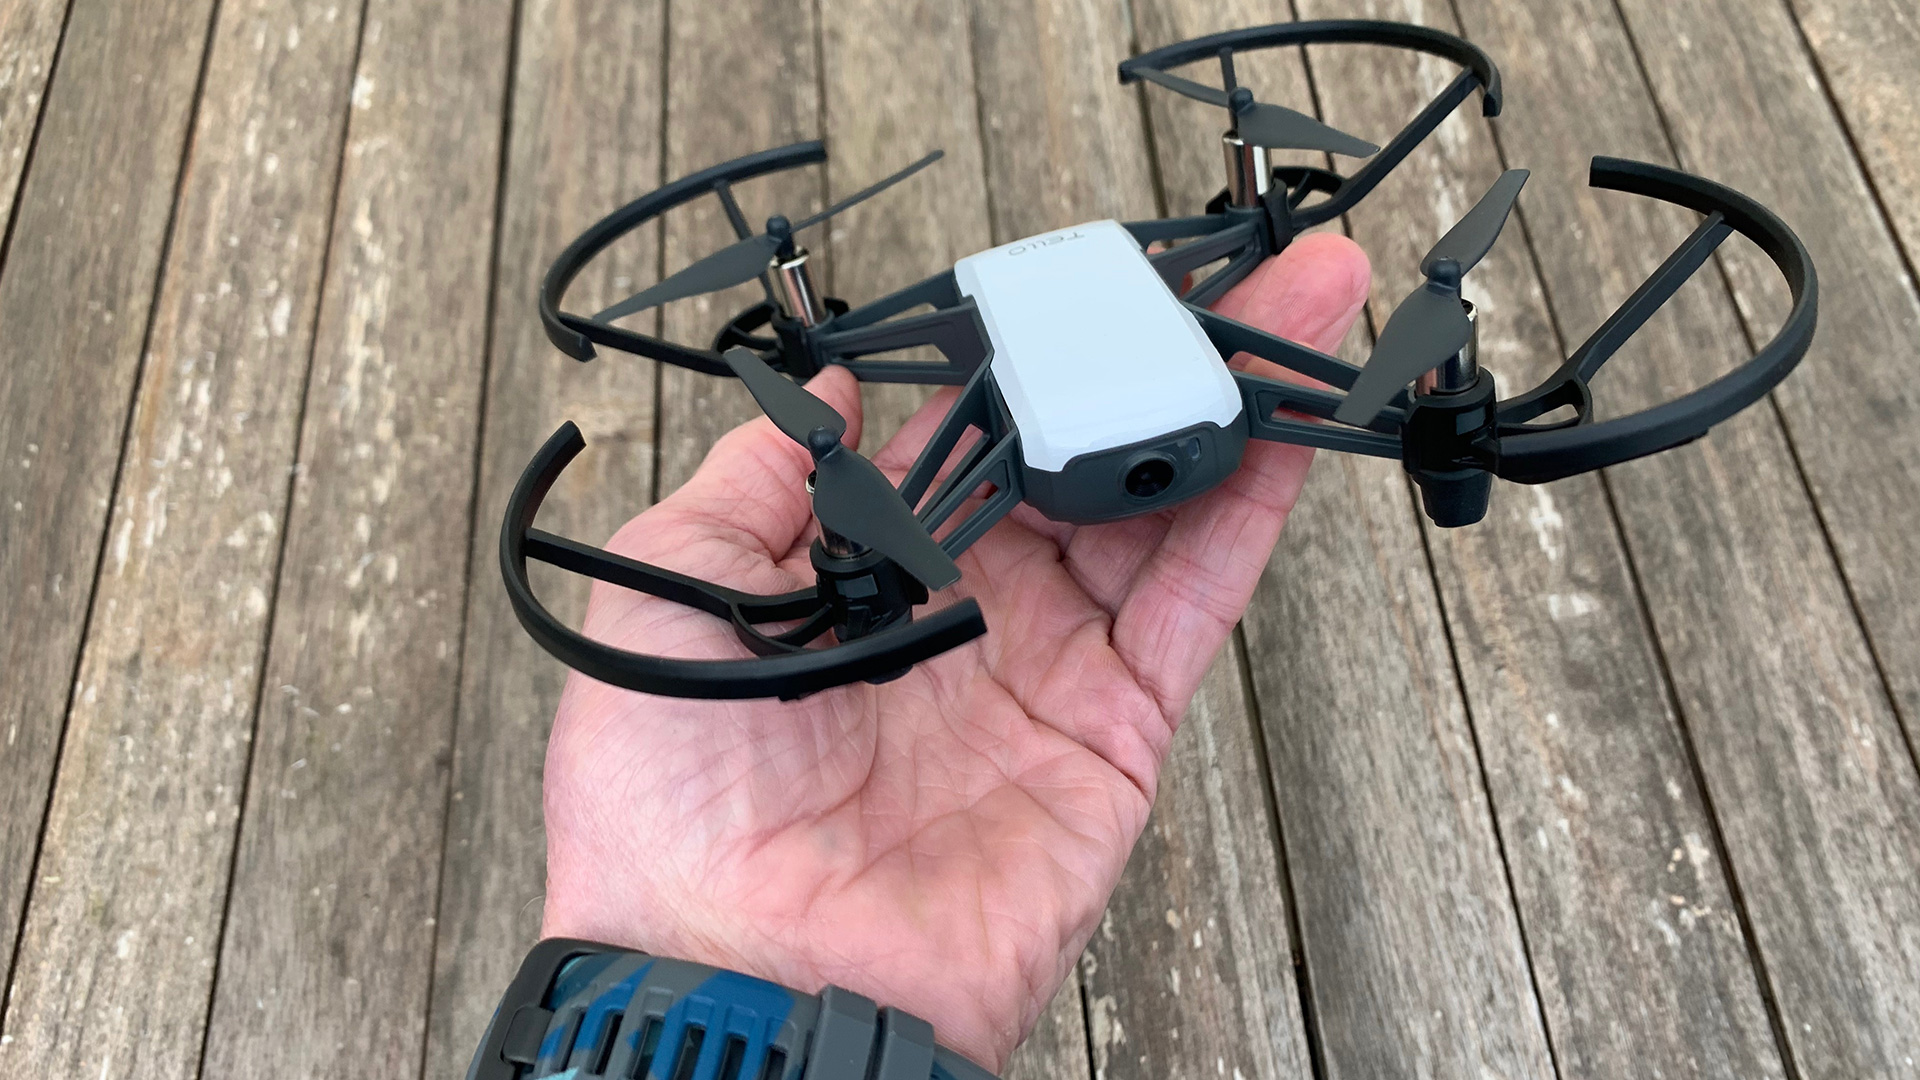 Ryze Tello drone review: precise moves and incredible stability